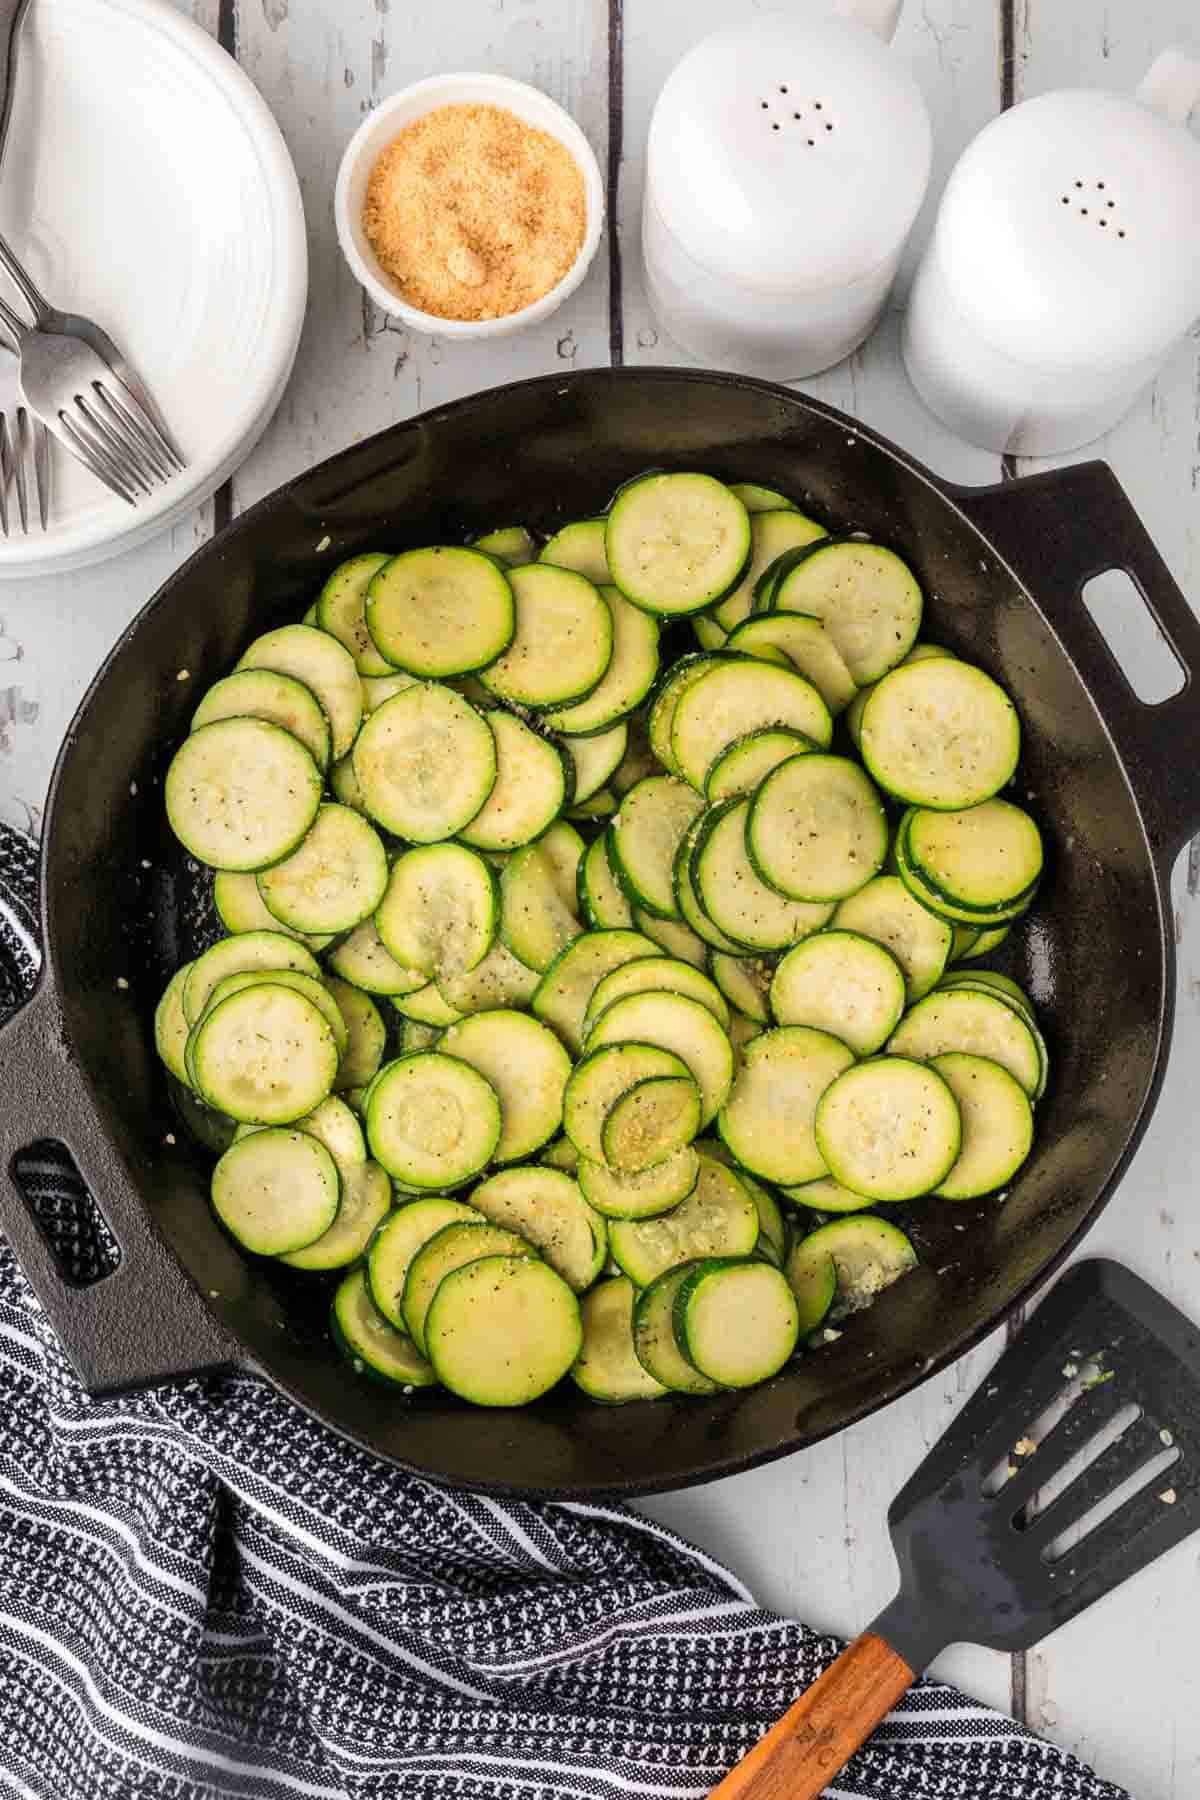 How to Cut Zucchini - The Wooden Skillet